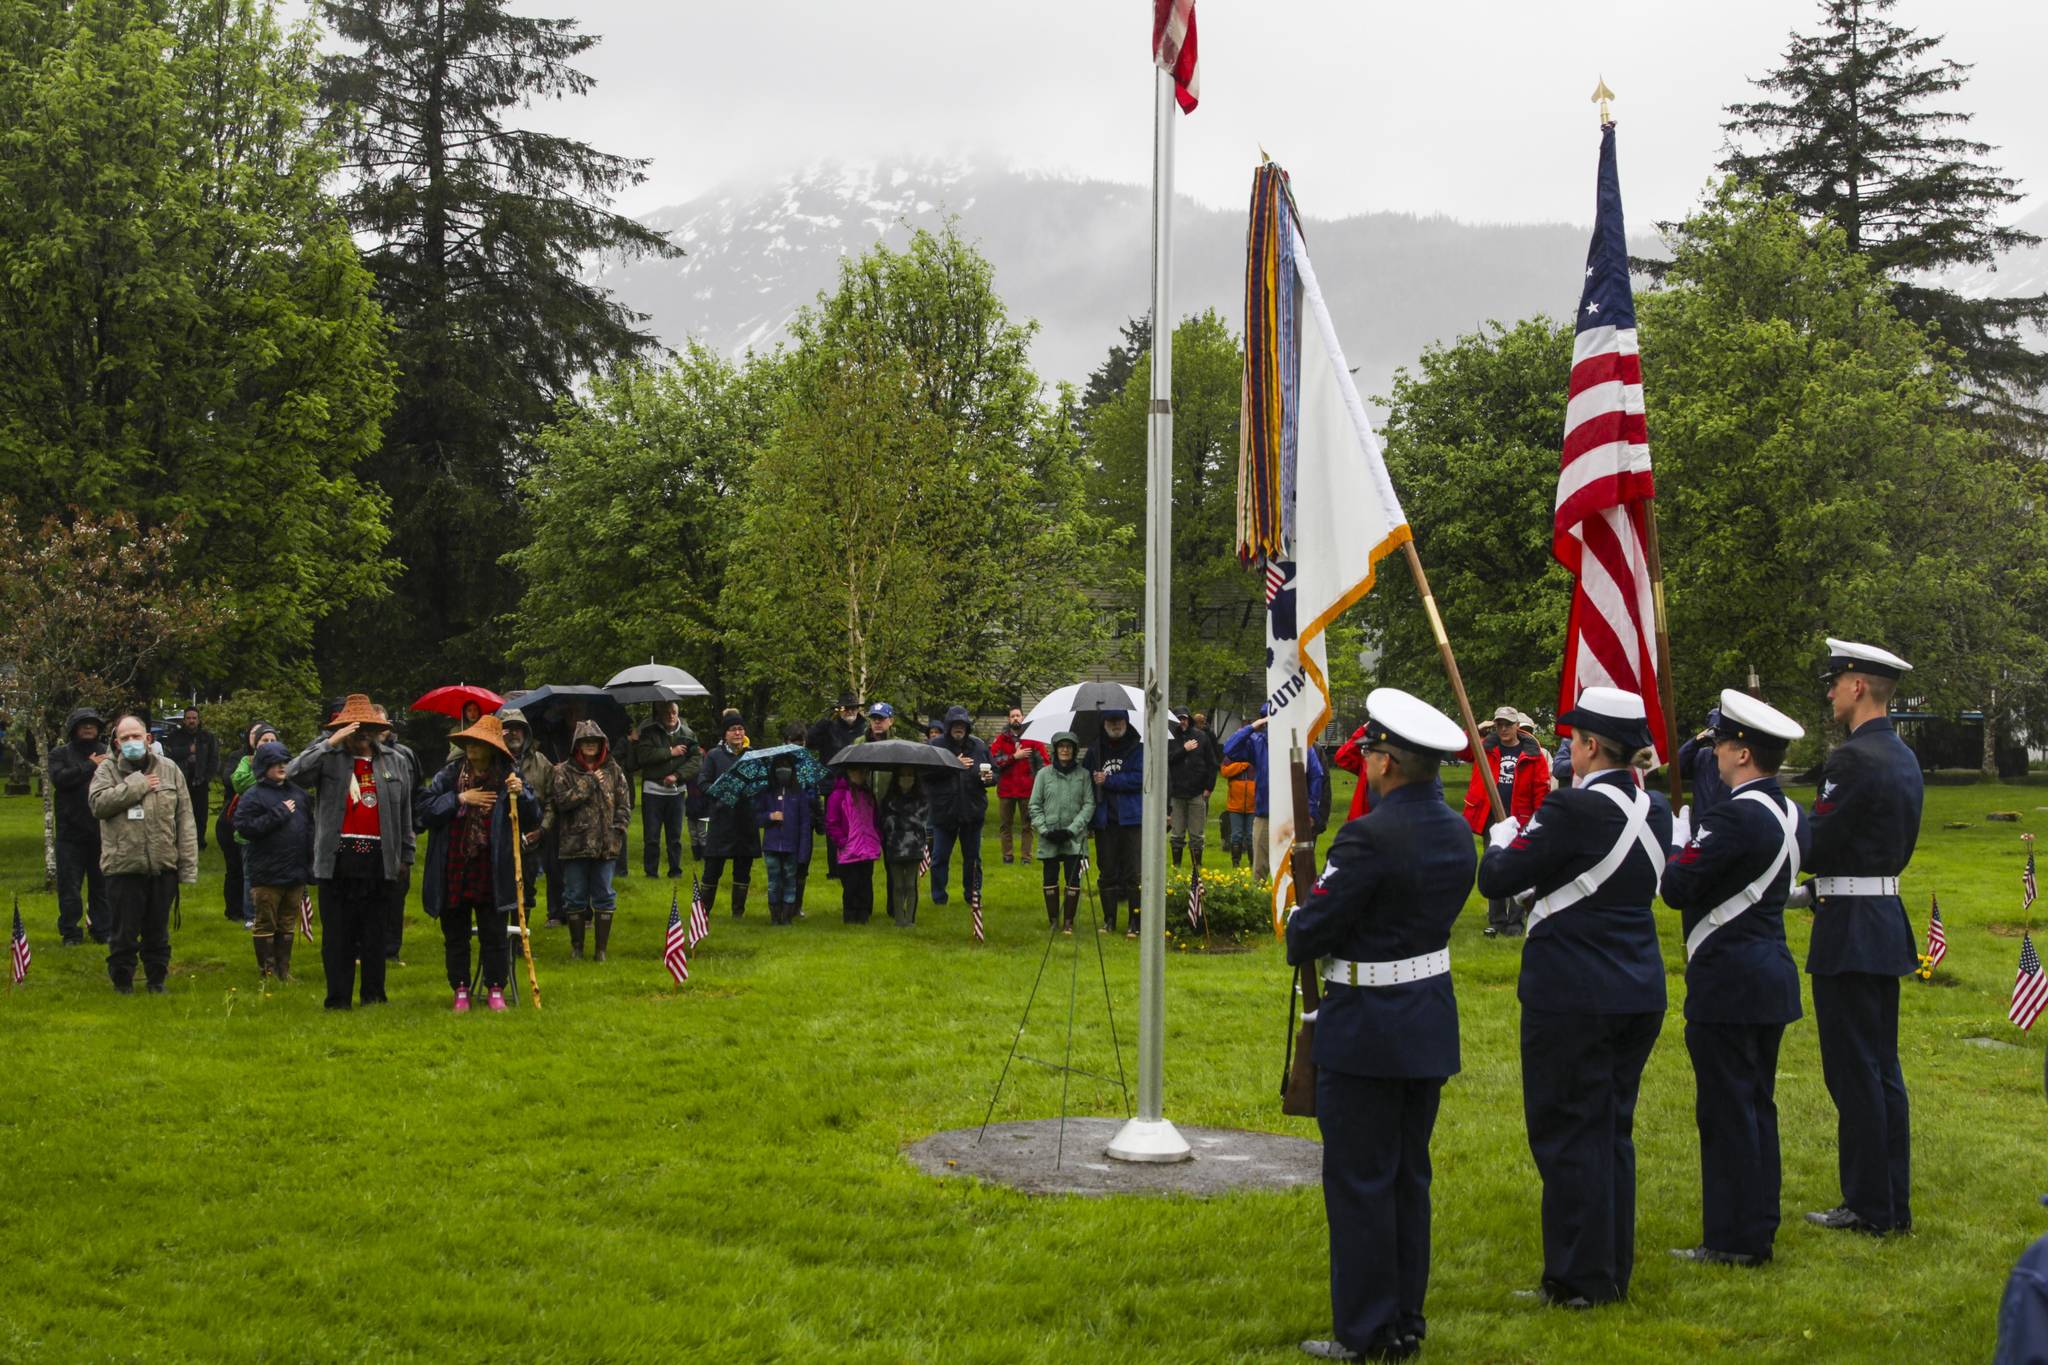 A Coast Guard color guard parades the colors at a Memorial Day ceremony held by the Veterans of Foreign Wars Post 5559 at Evergreen Cemetery on May 31, 2021. (Michael S. Lockett / Juneau Empire)